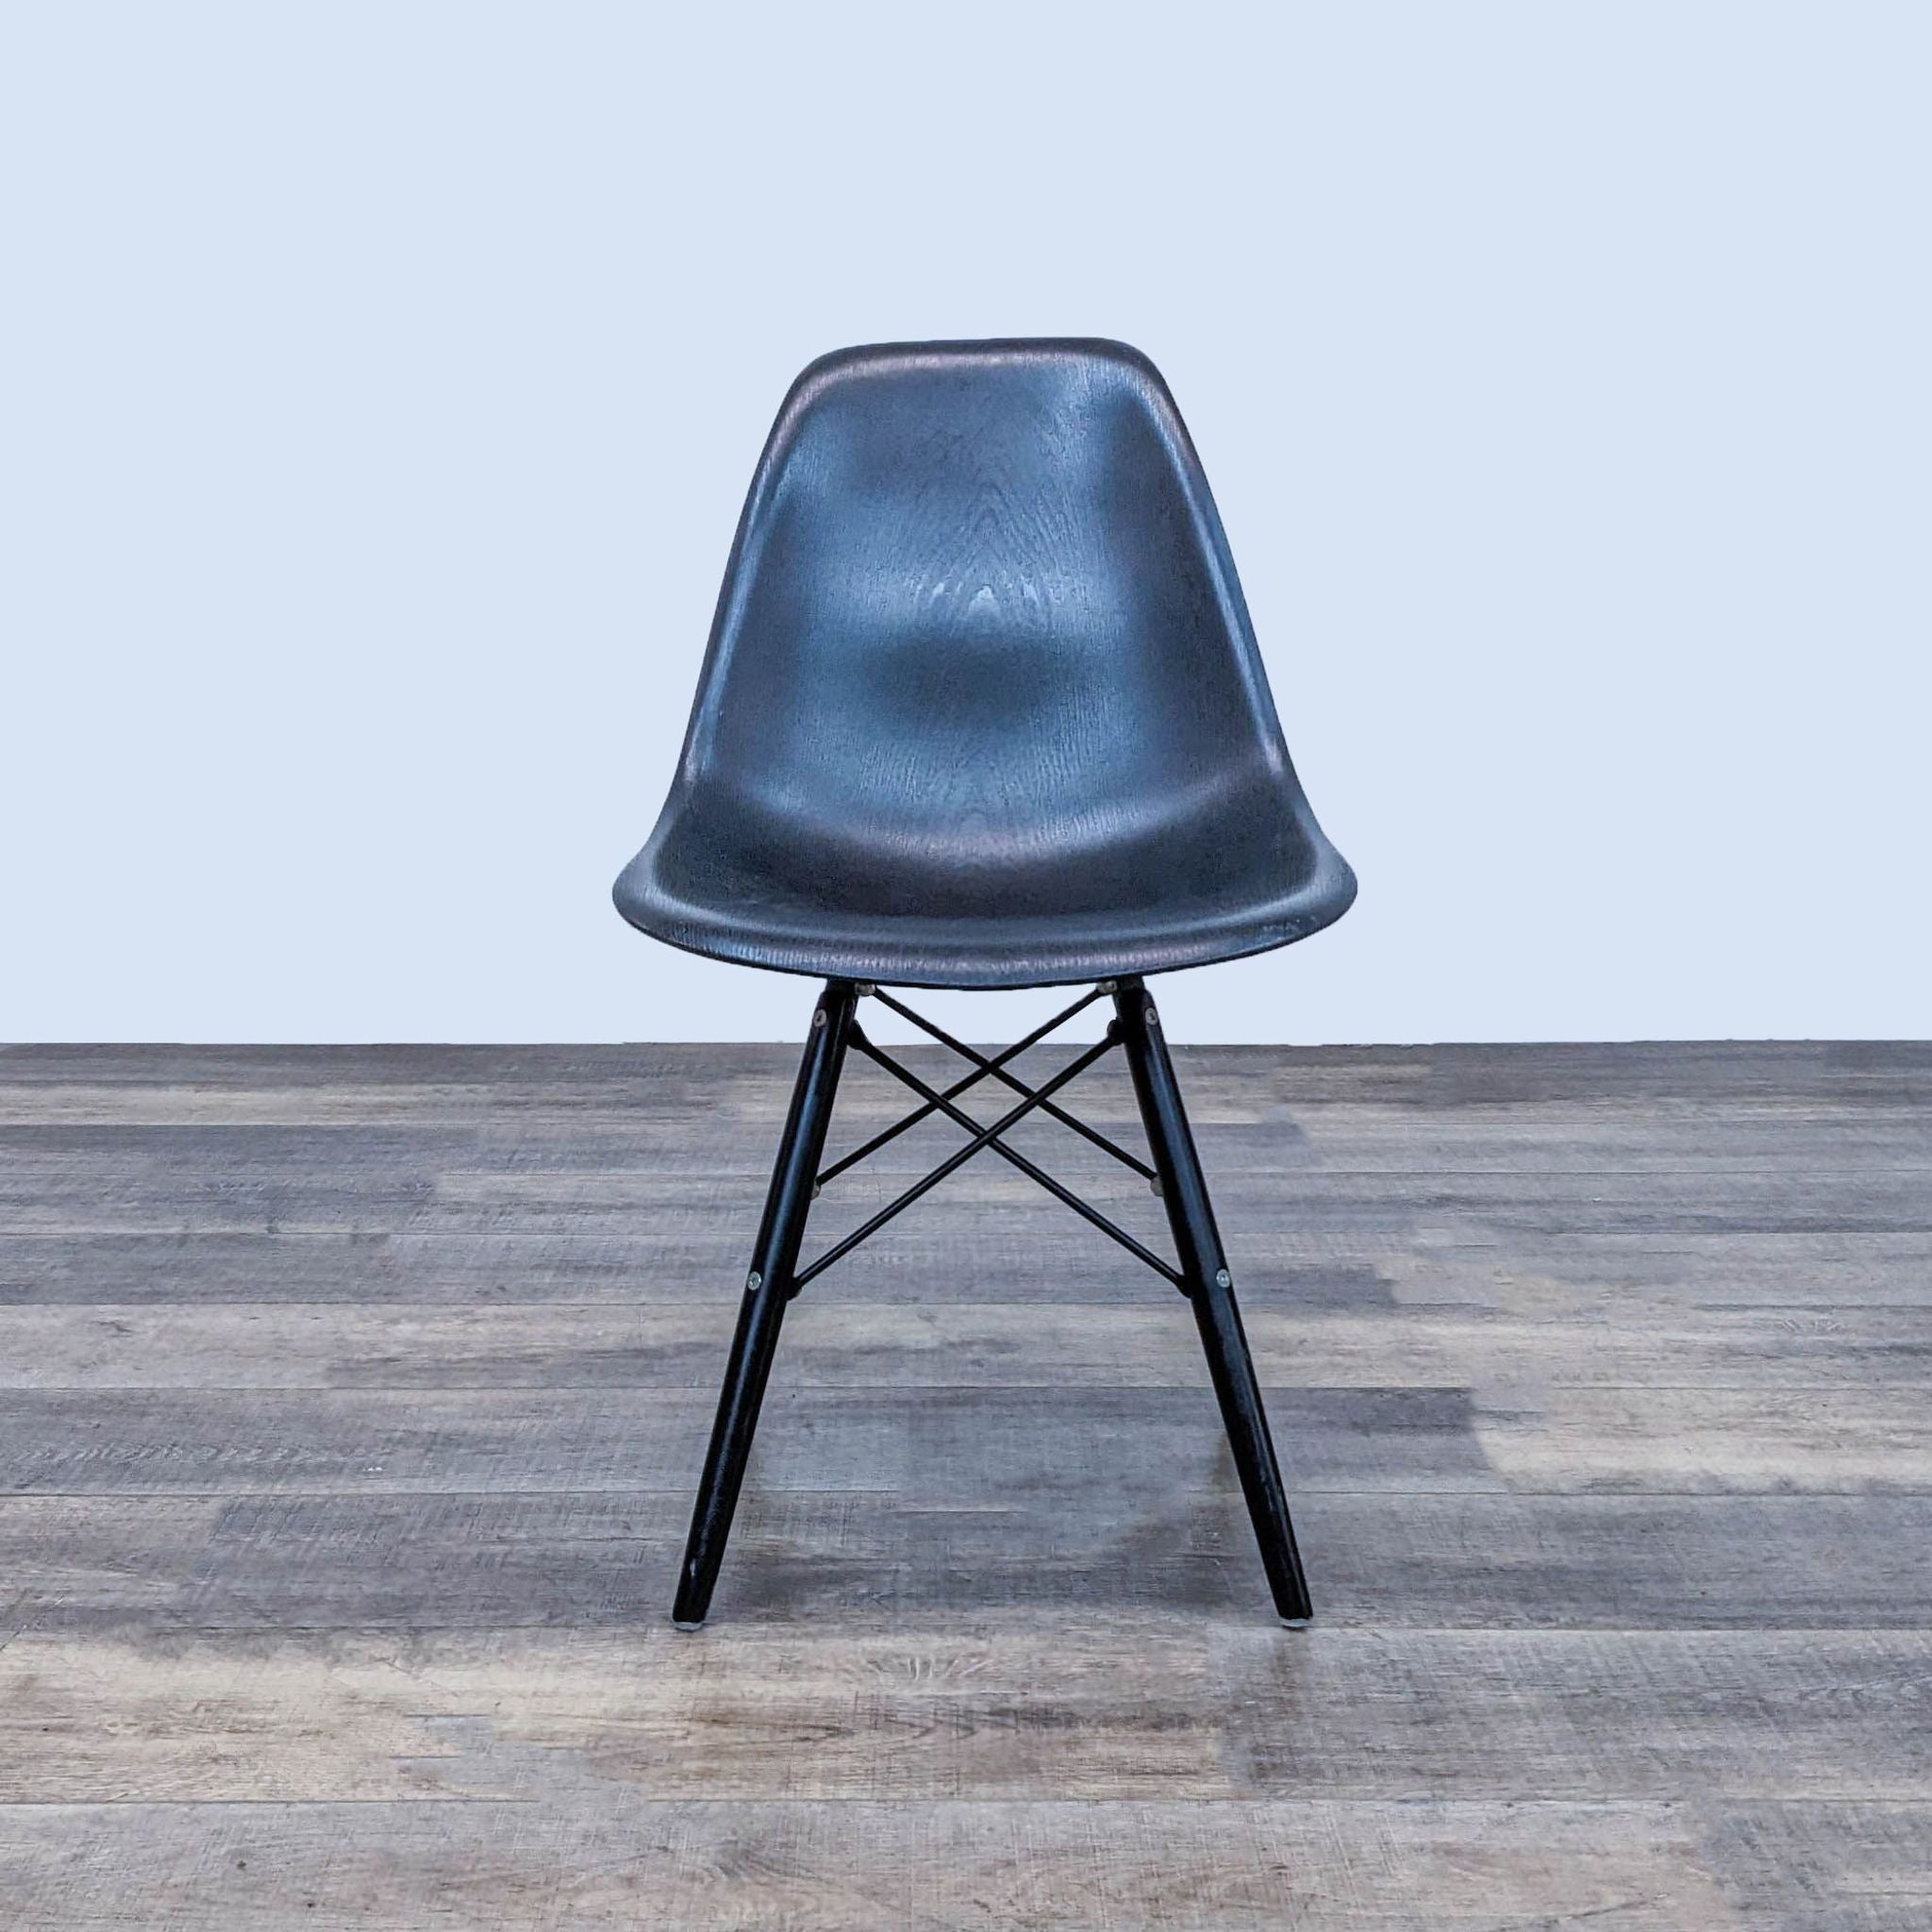 Reperch contoured black plastic dining chair with wood grain texture on Eiffel-style metal base, frontal view.